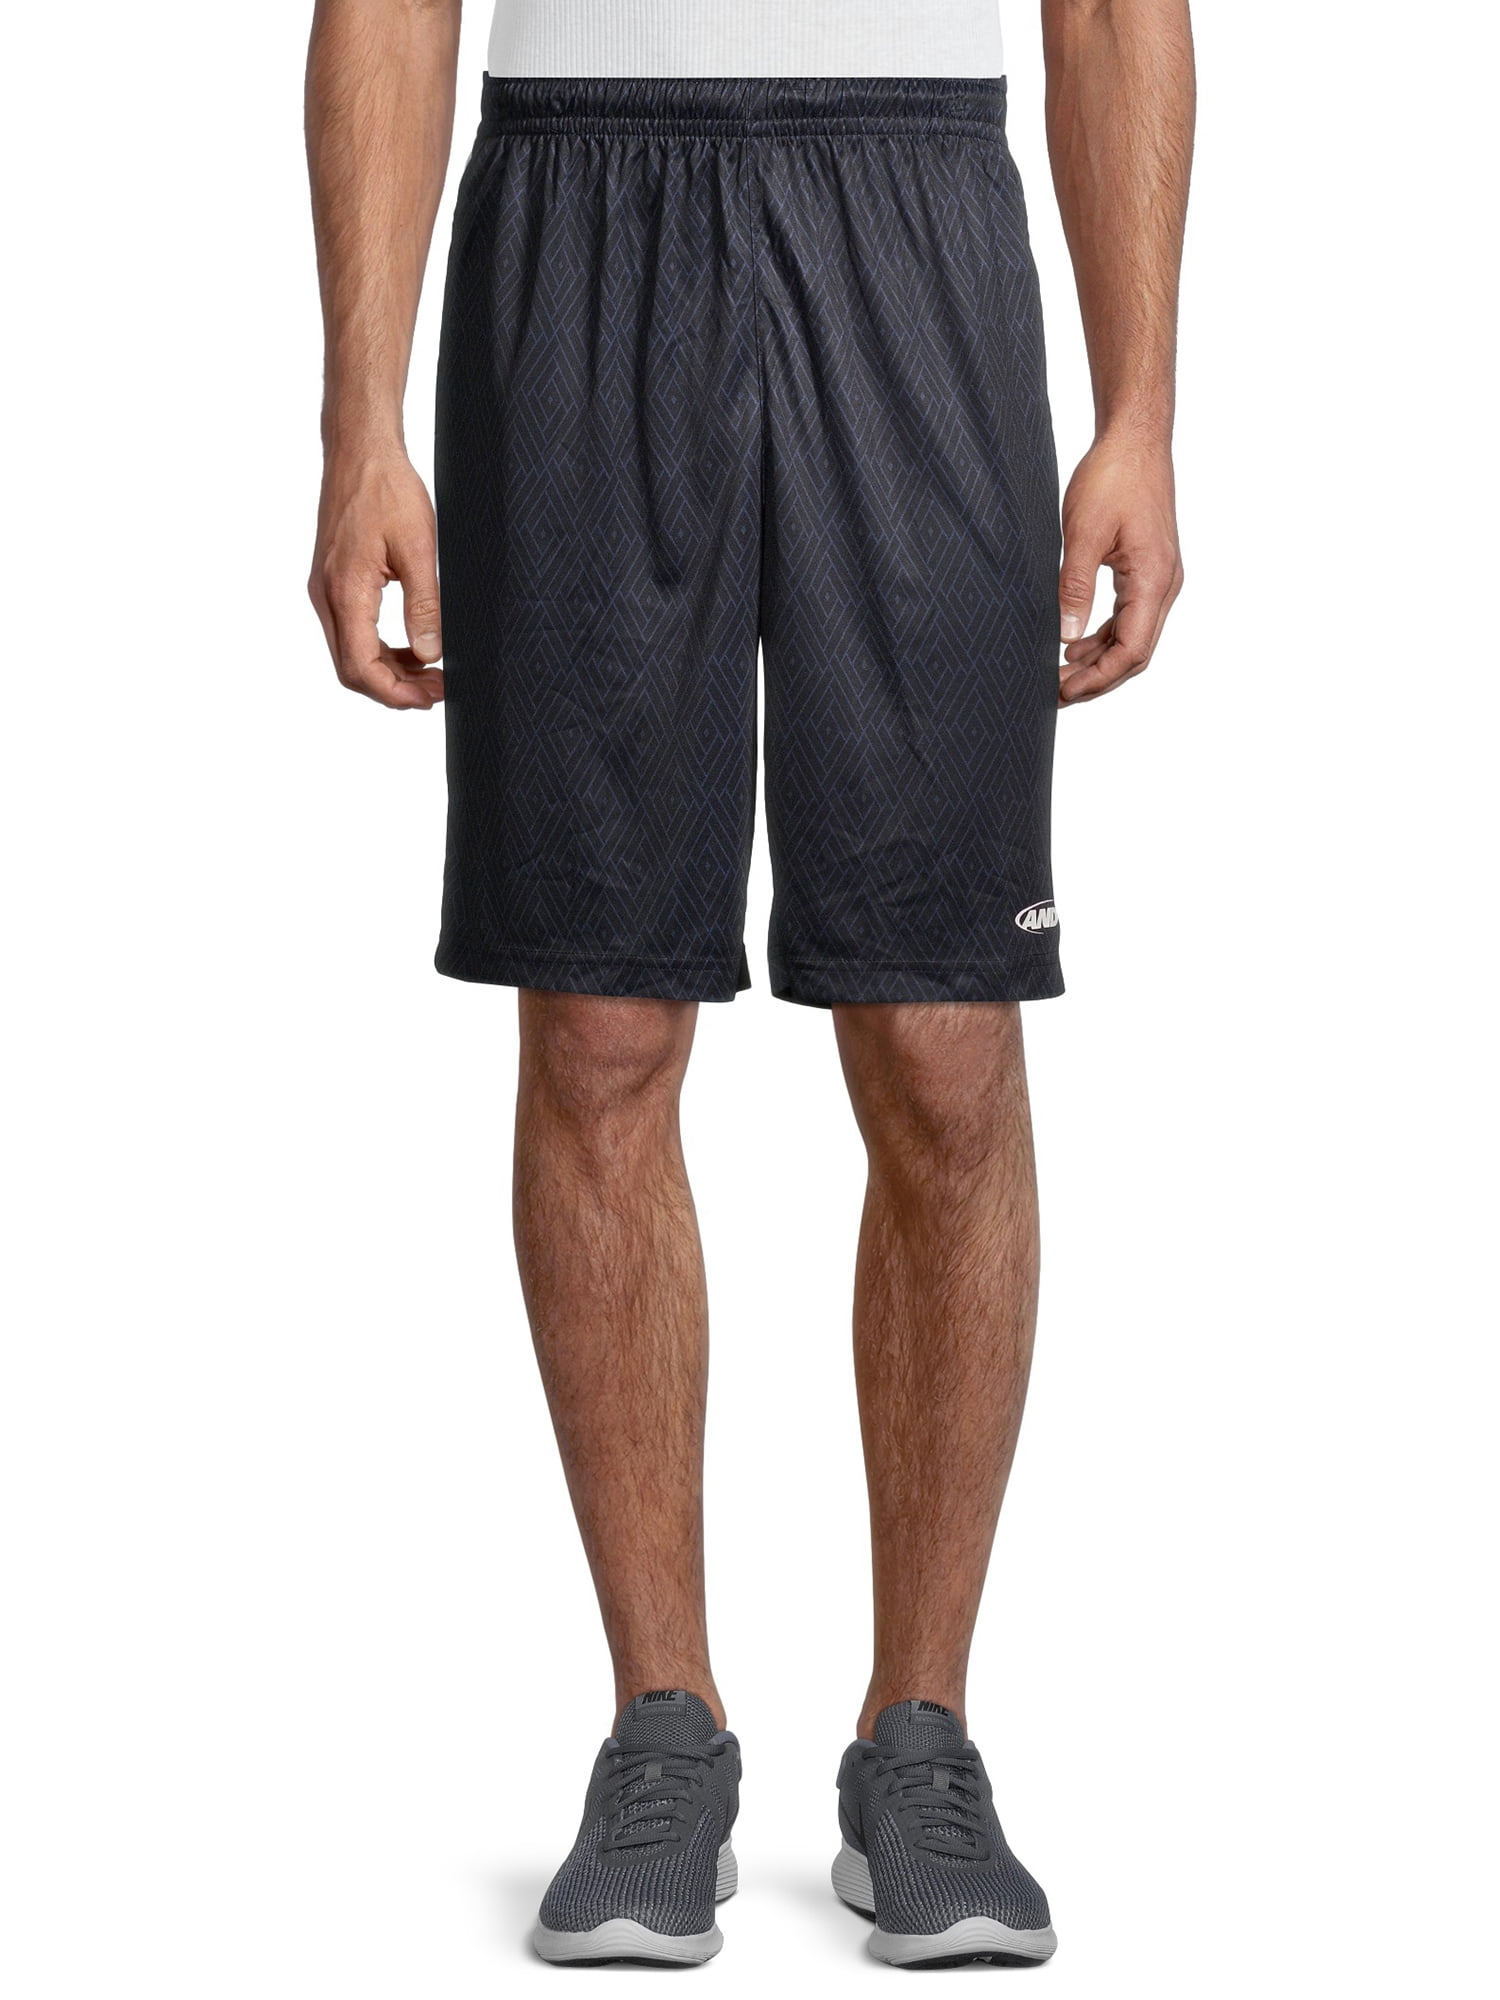 AND1 Men's Level Up Basketball Shorts, up to 2XL - Walmart.com